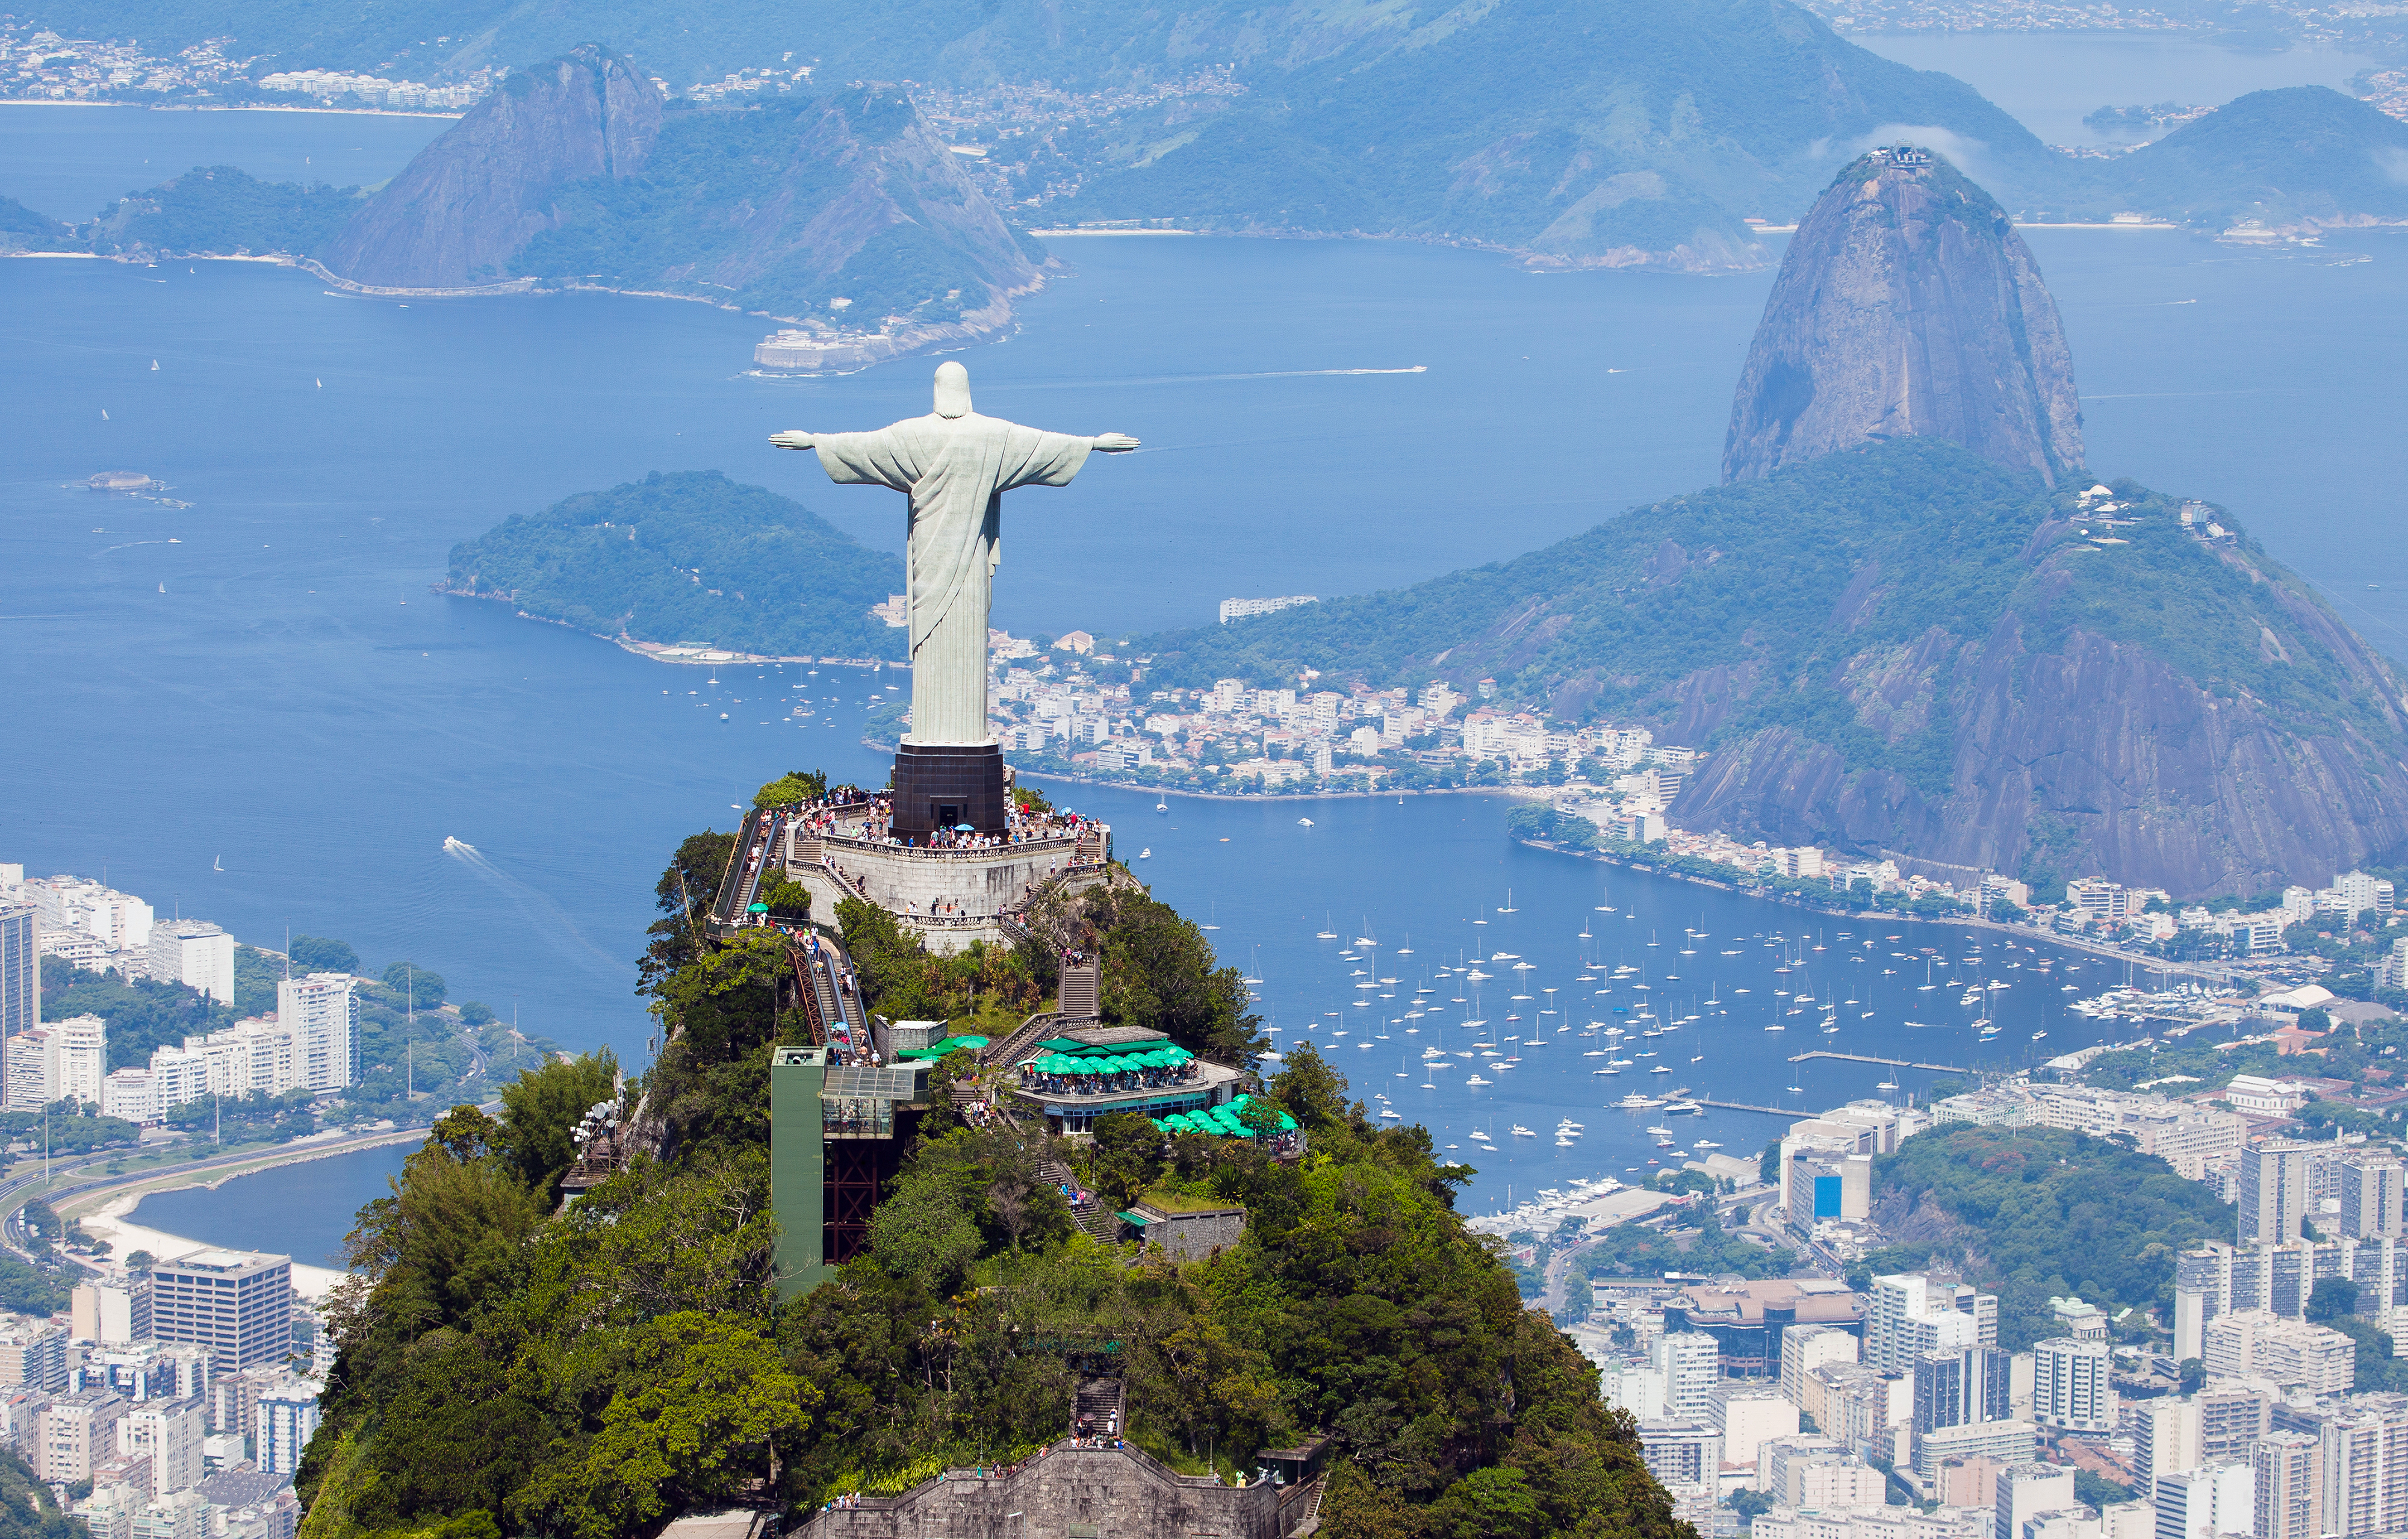 A statue of a male figure with arms outstretched – Rio's Christ the Redeemer statue – stands on top of a rocky outcrop, facing away from the camera. In the background are the rocky Sugarloaf Mountain and a bay lined by skyscrapers.